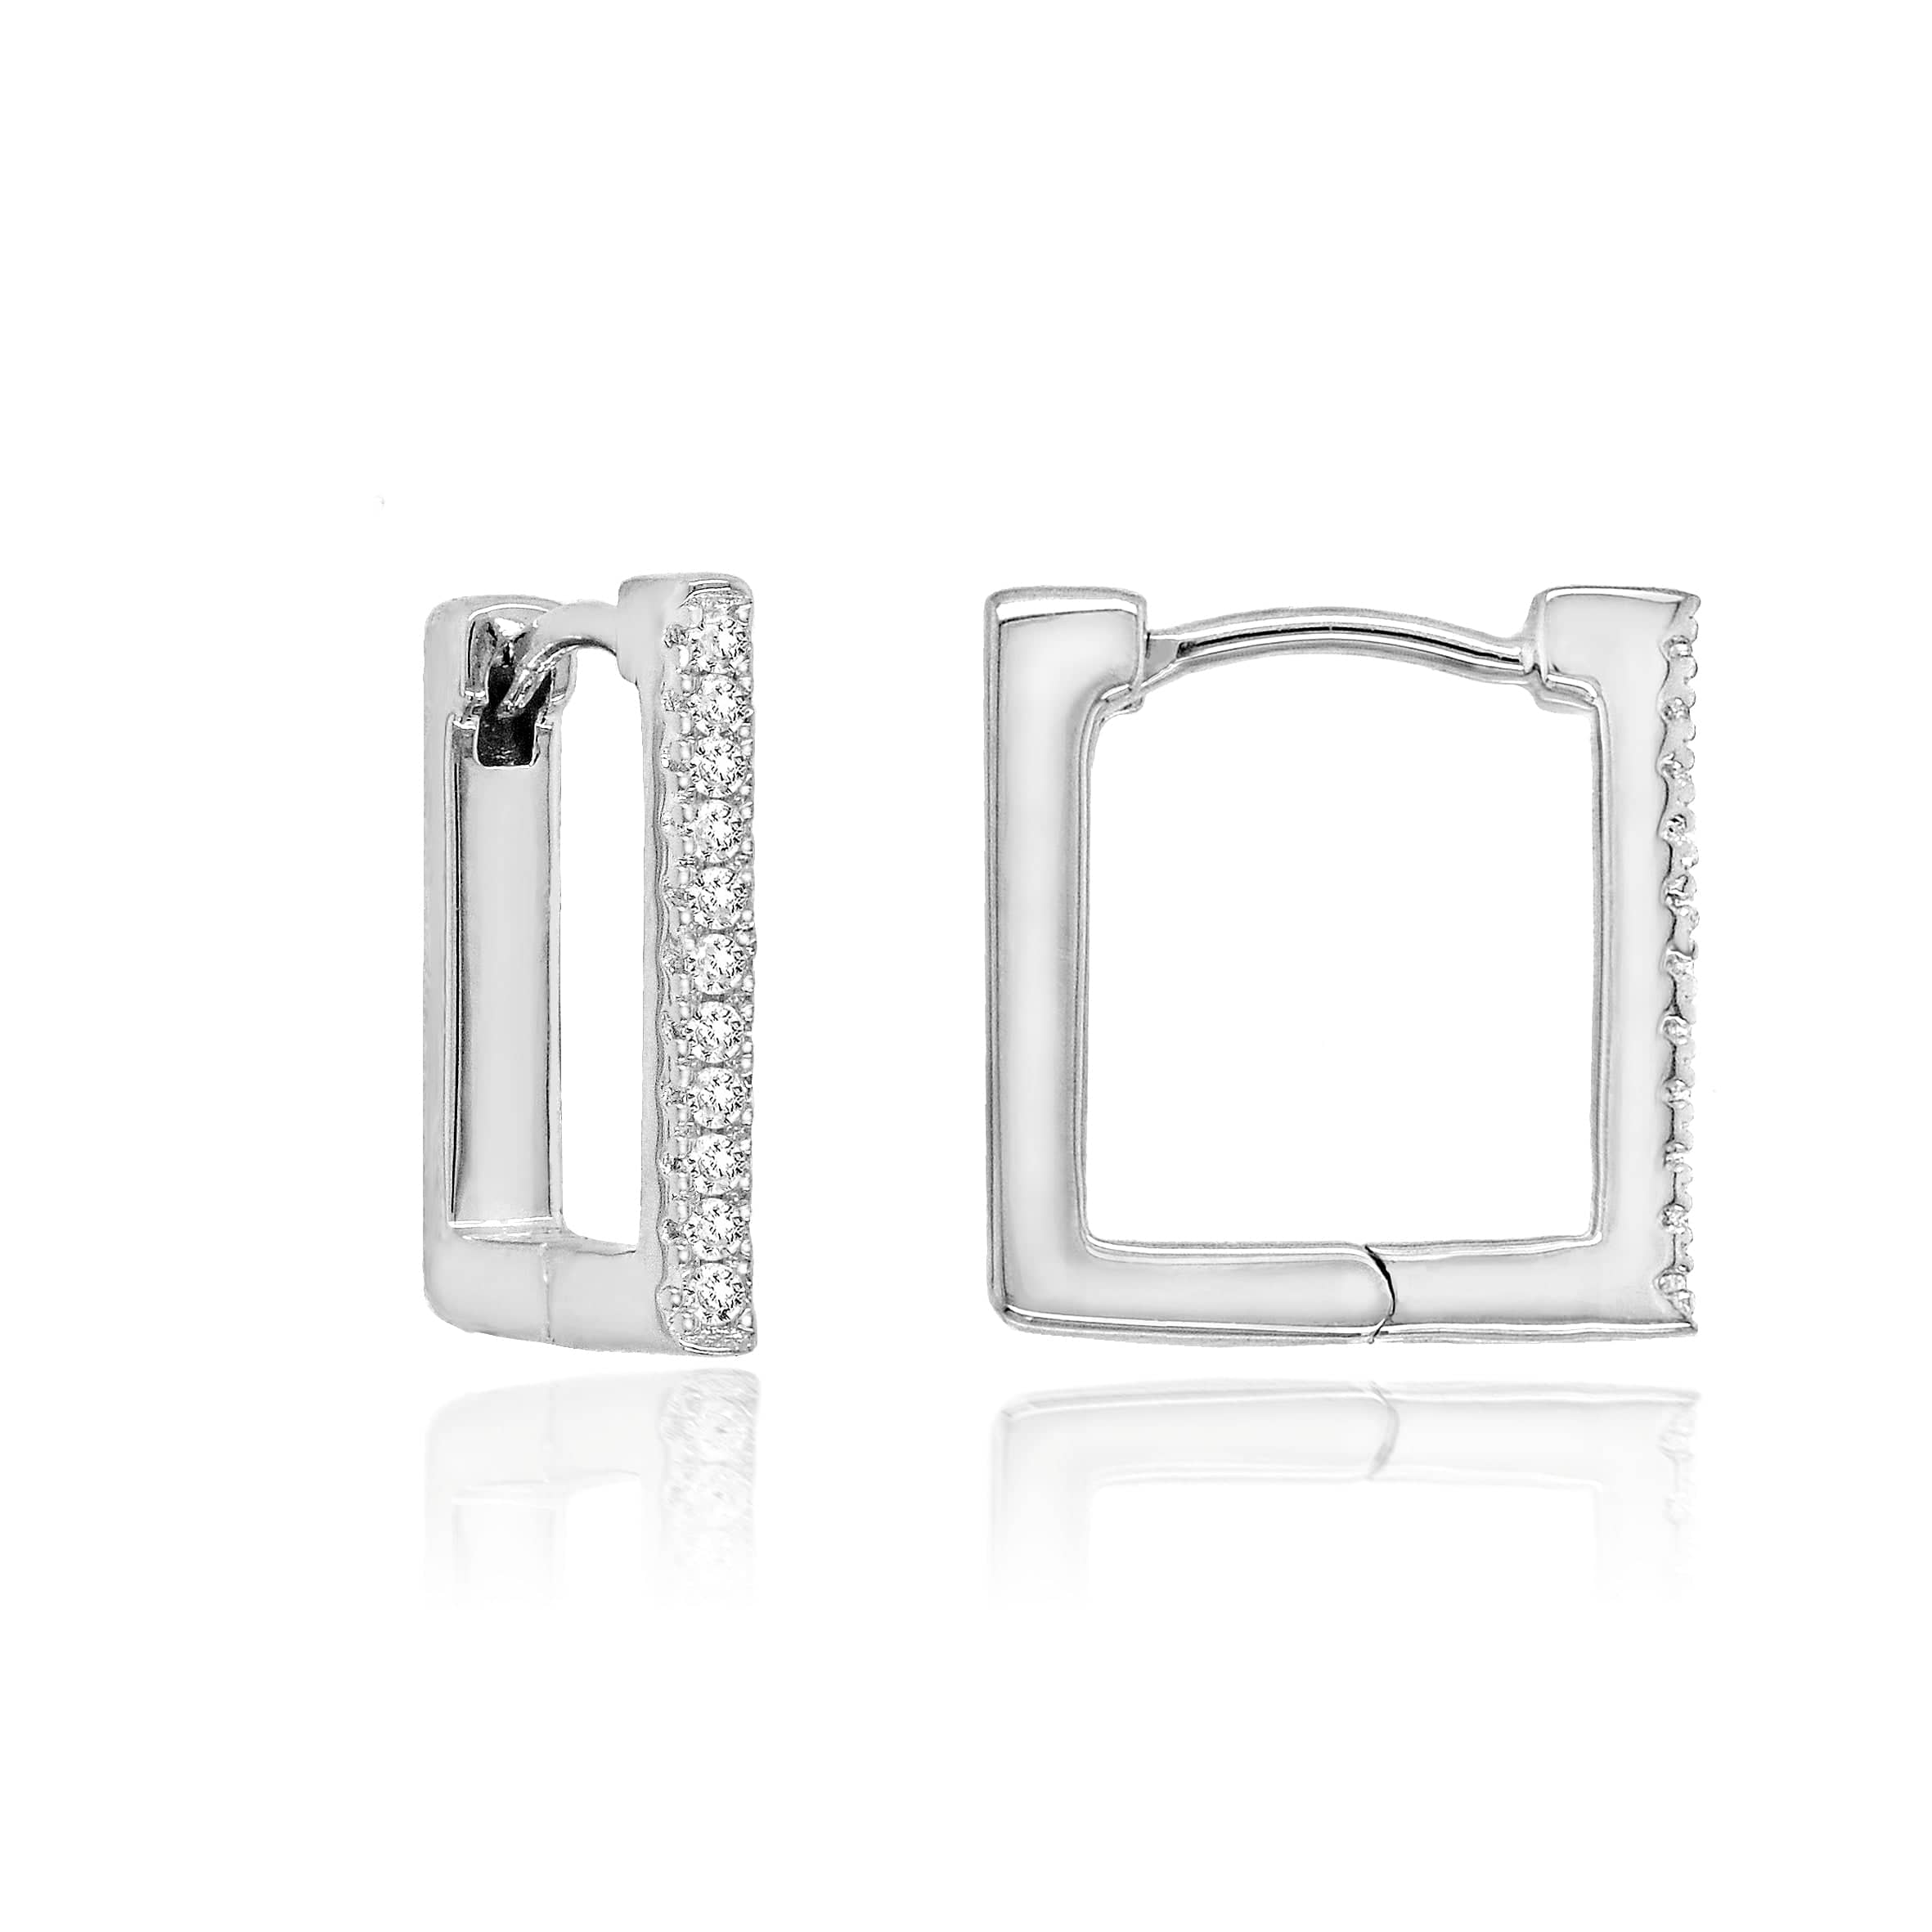 Lynora Silver Earring Sterling Silver / Clear Square Huggie Sparkle Silver Earrings